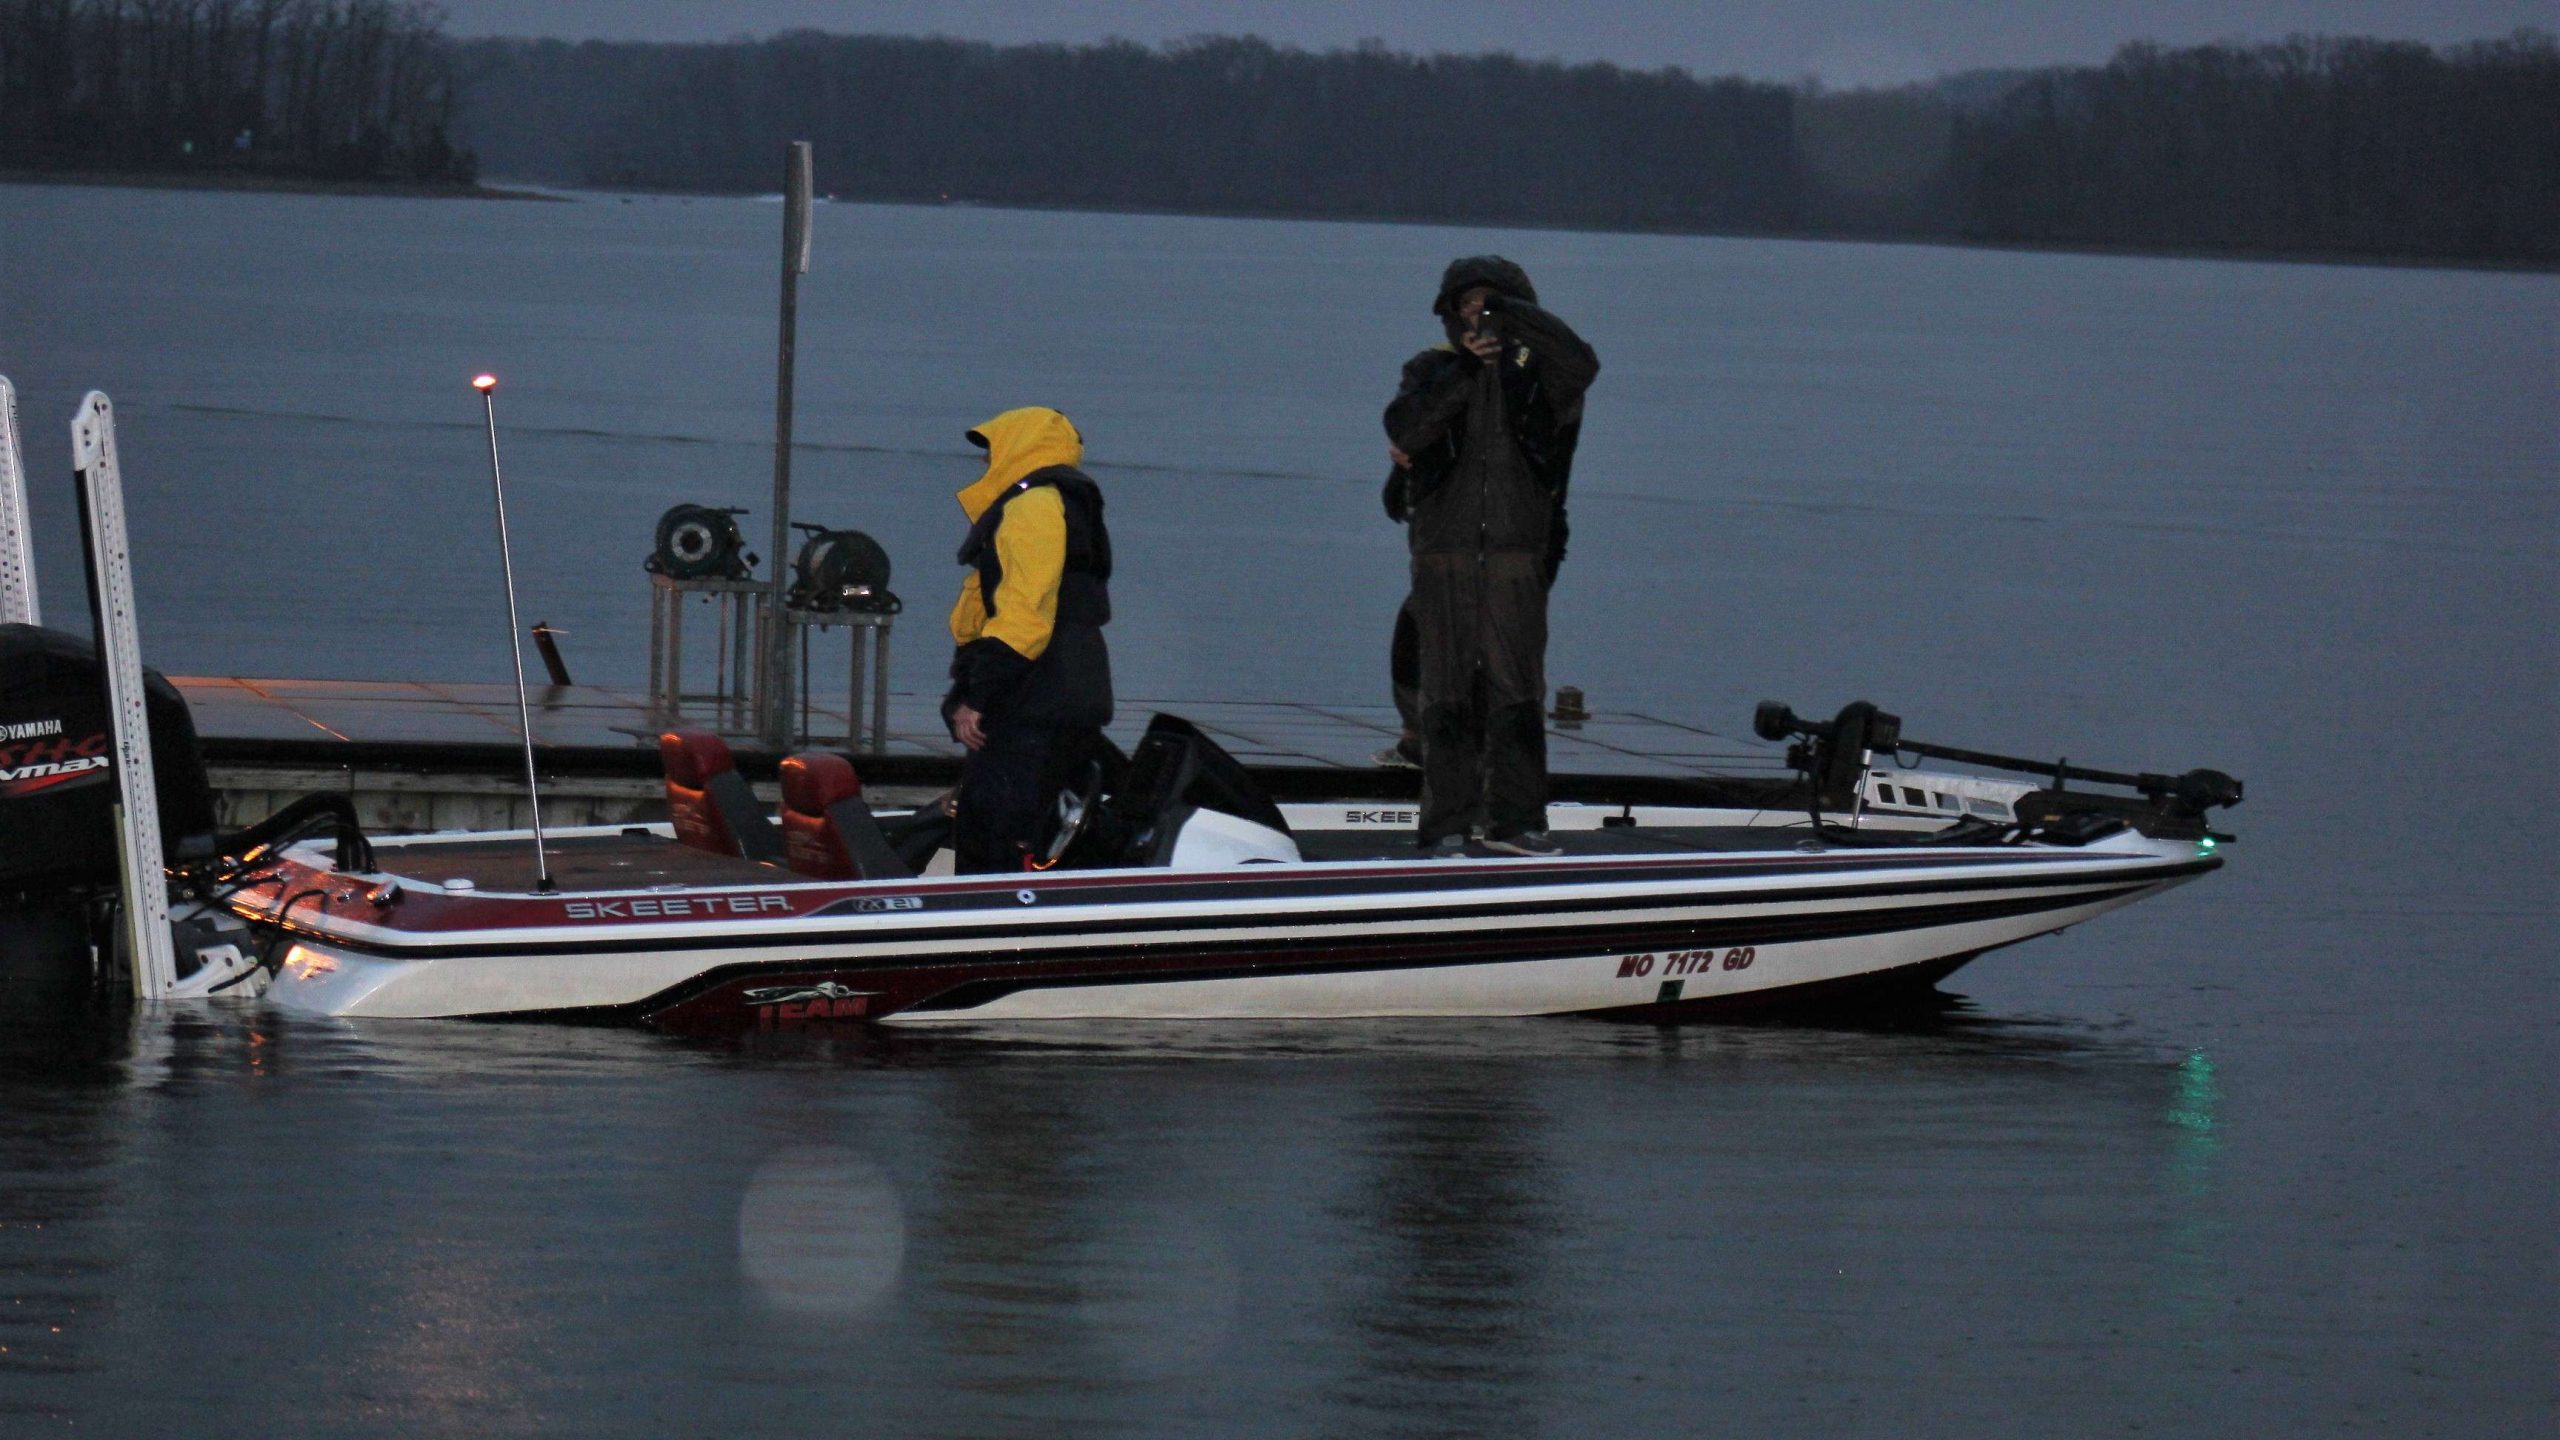 Thereâs boat No. 1 of the day â Douglas Guidorzi and William Curtright are the anglers aboard.